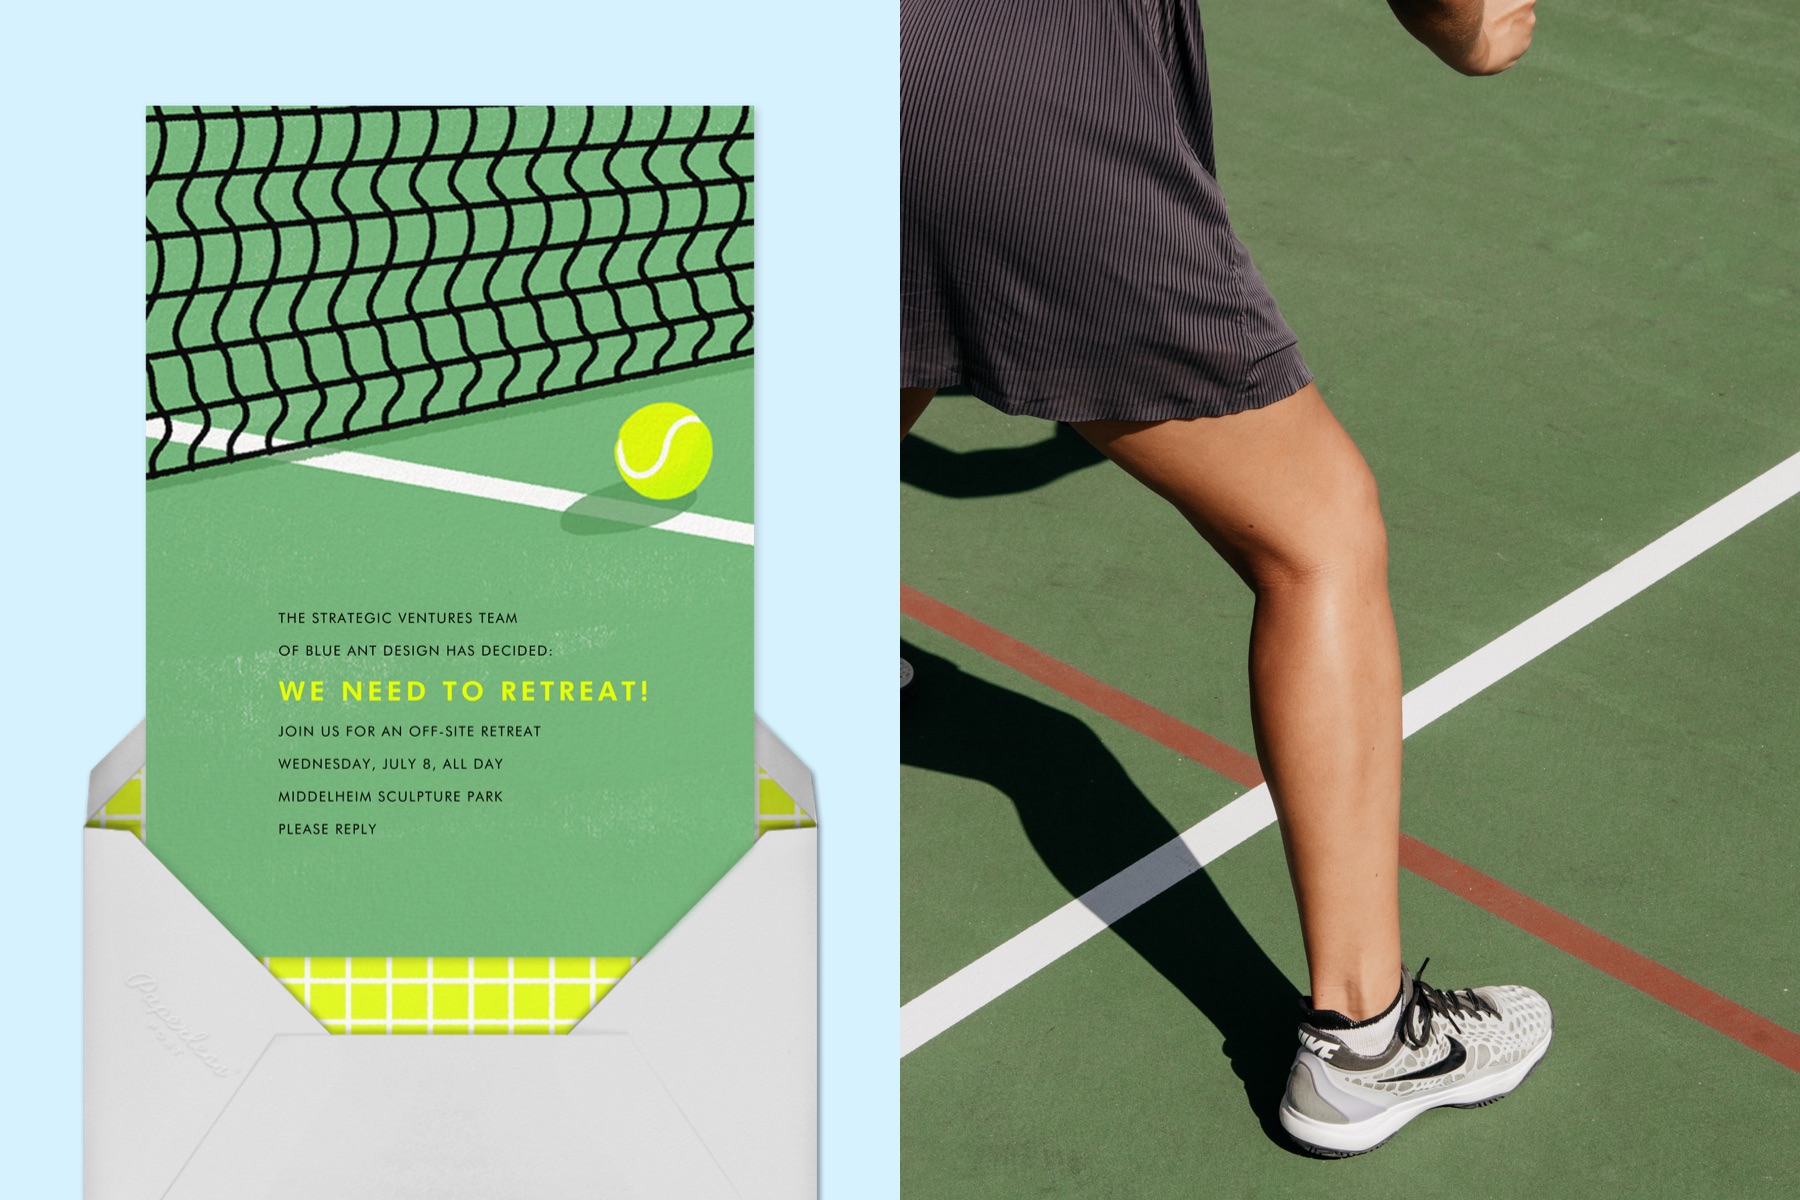 Left: “Holding Court” by Paperless Post | Right: Photo of a man's leg while he is playing tennis